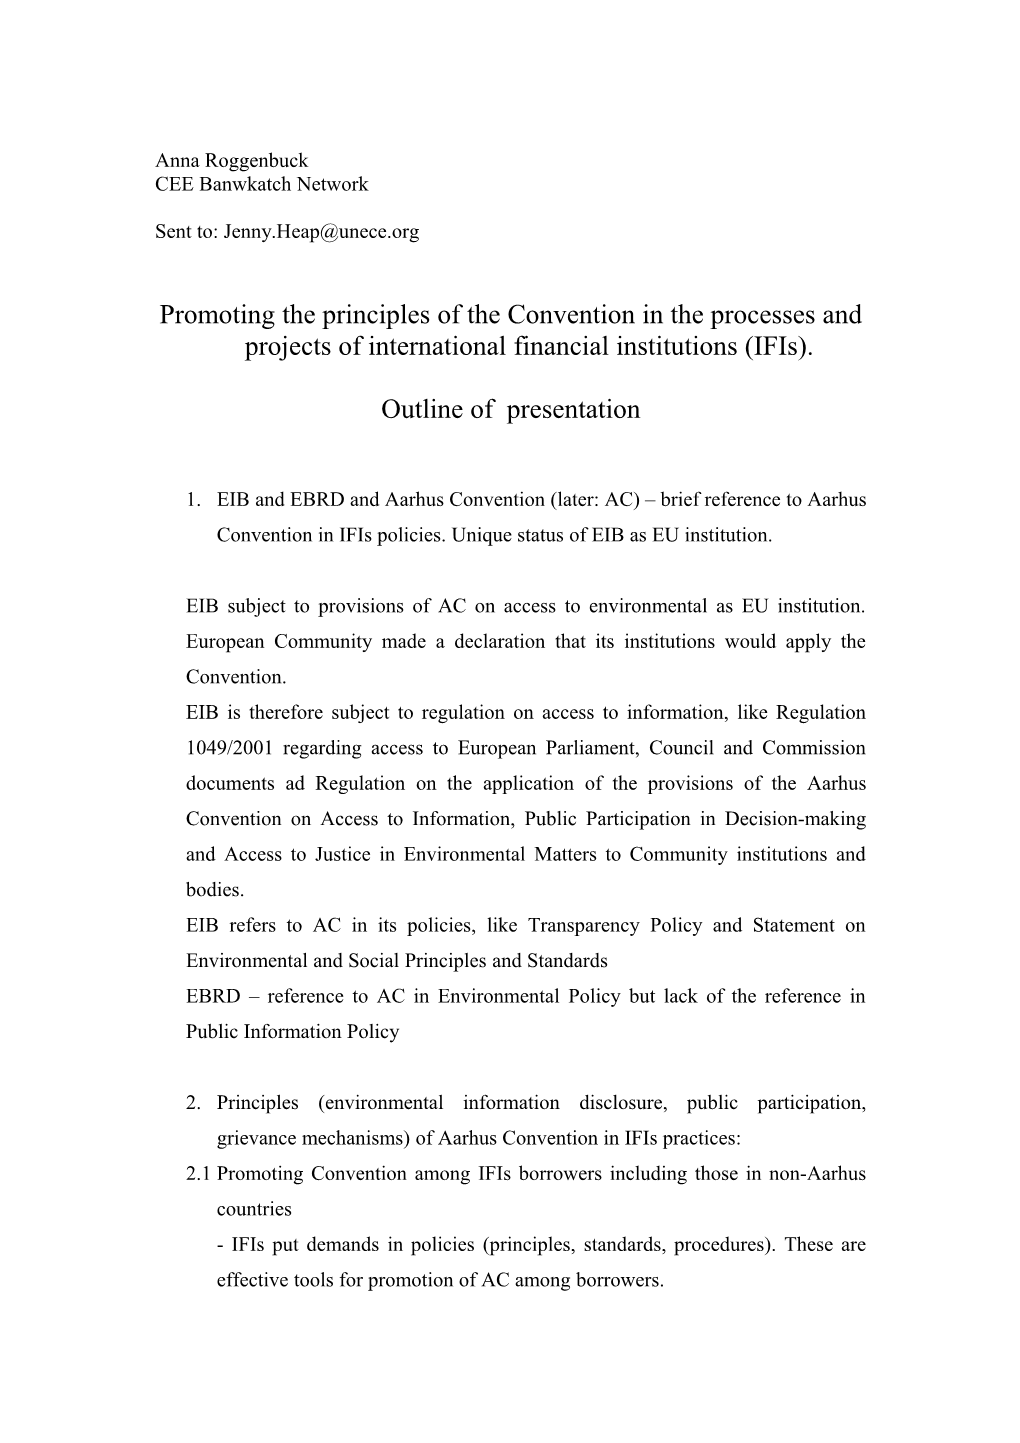 Promoting the Principles of the Convention in the Processes and Projects of International